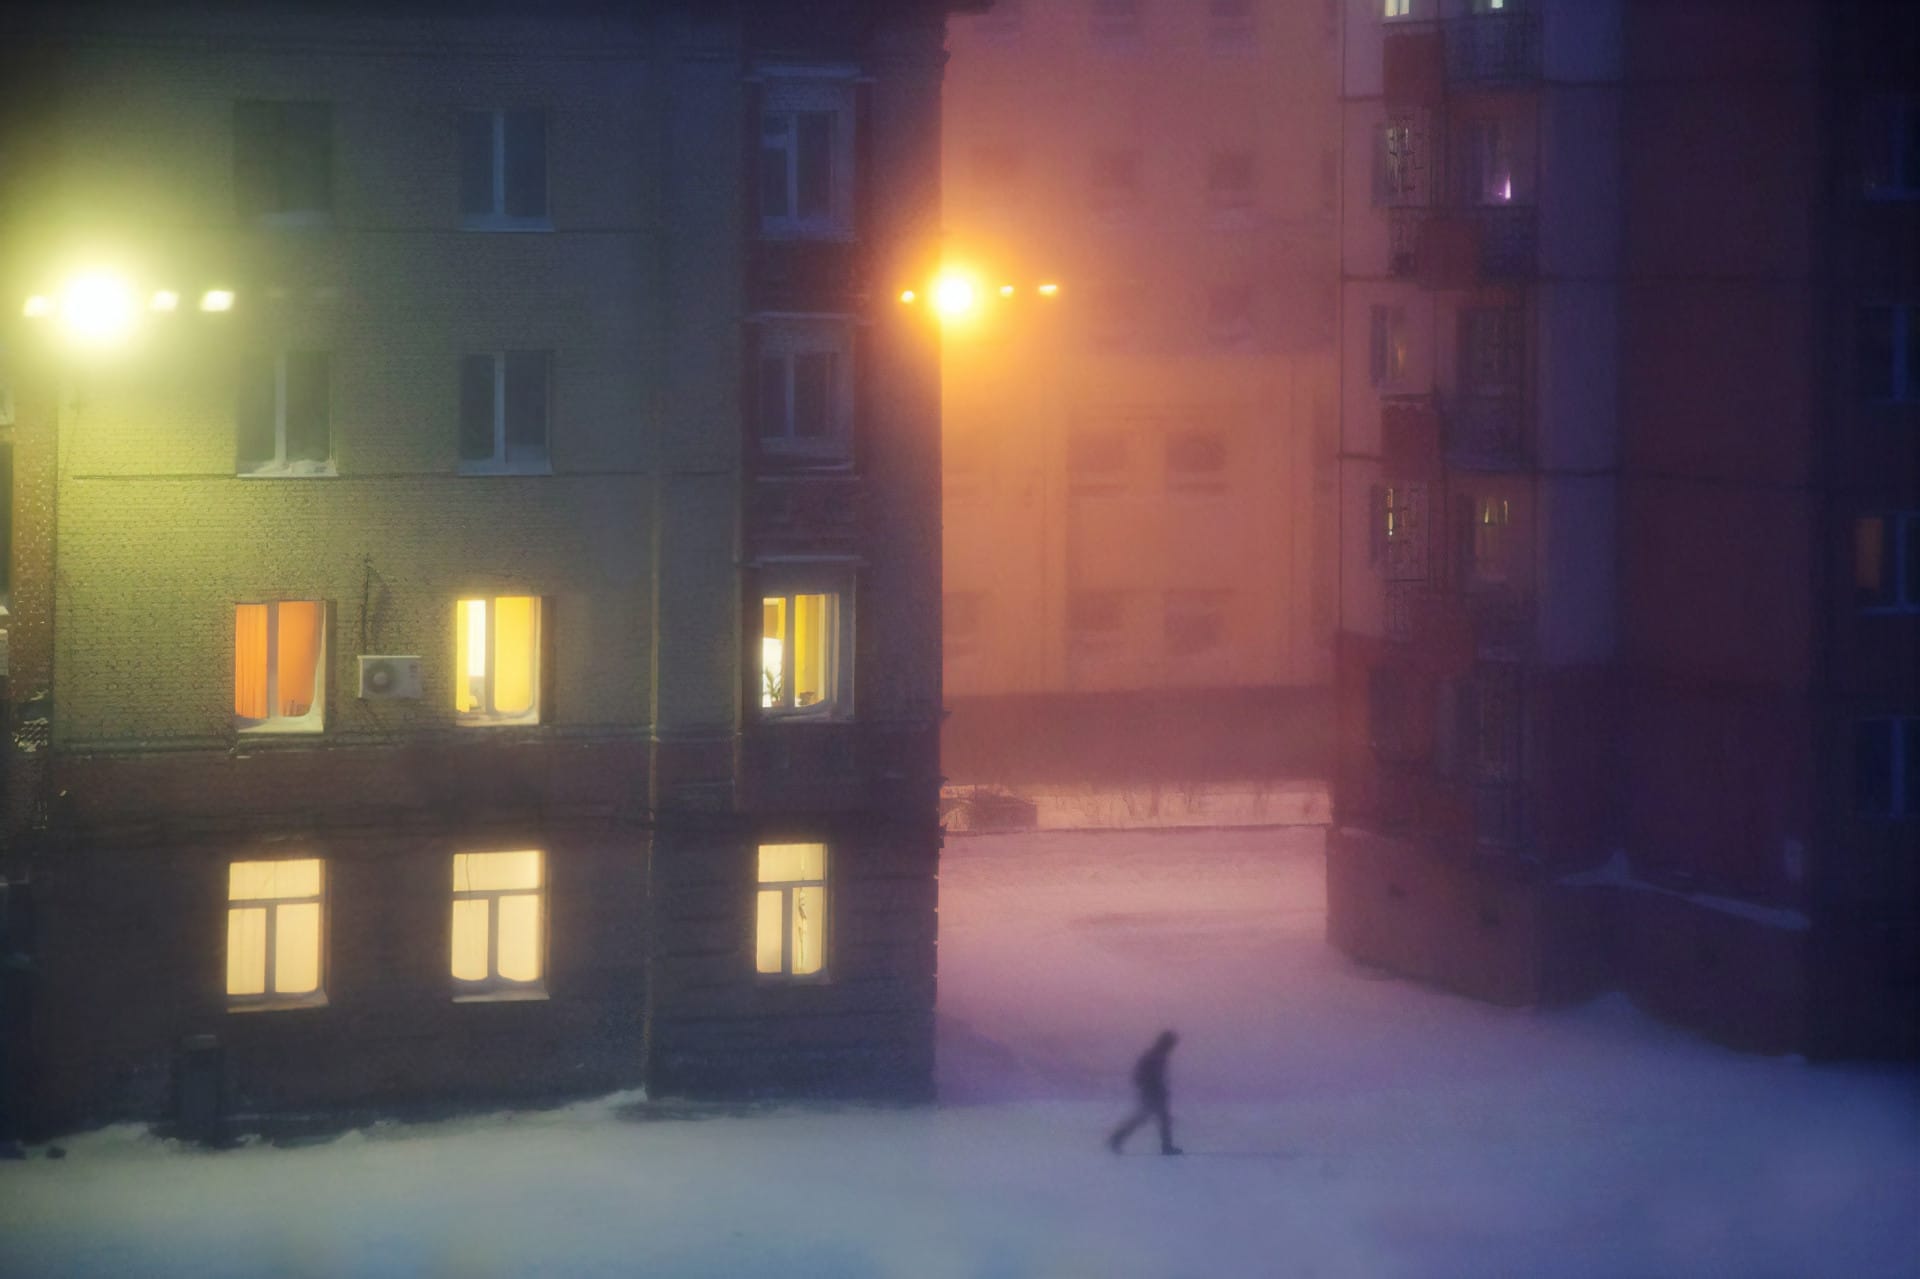 Christophe Jacrot in Norilsk, Russia’s most polluted city